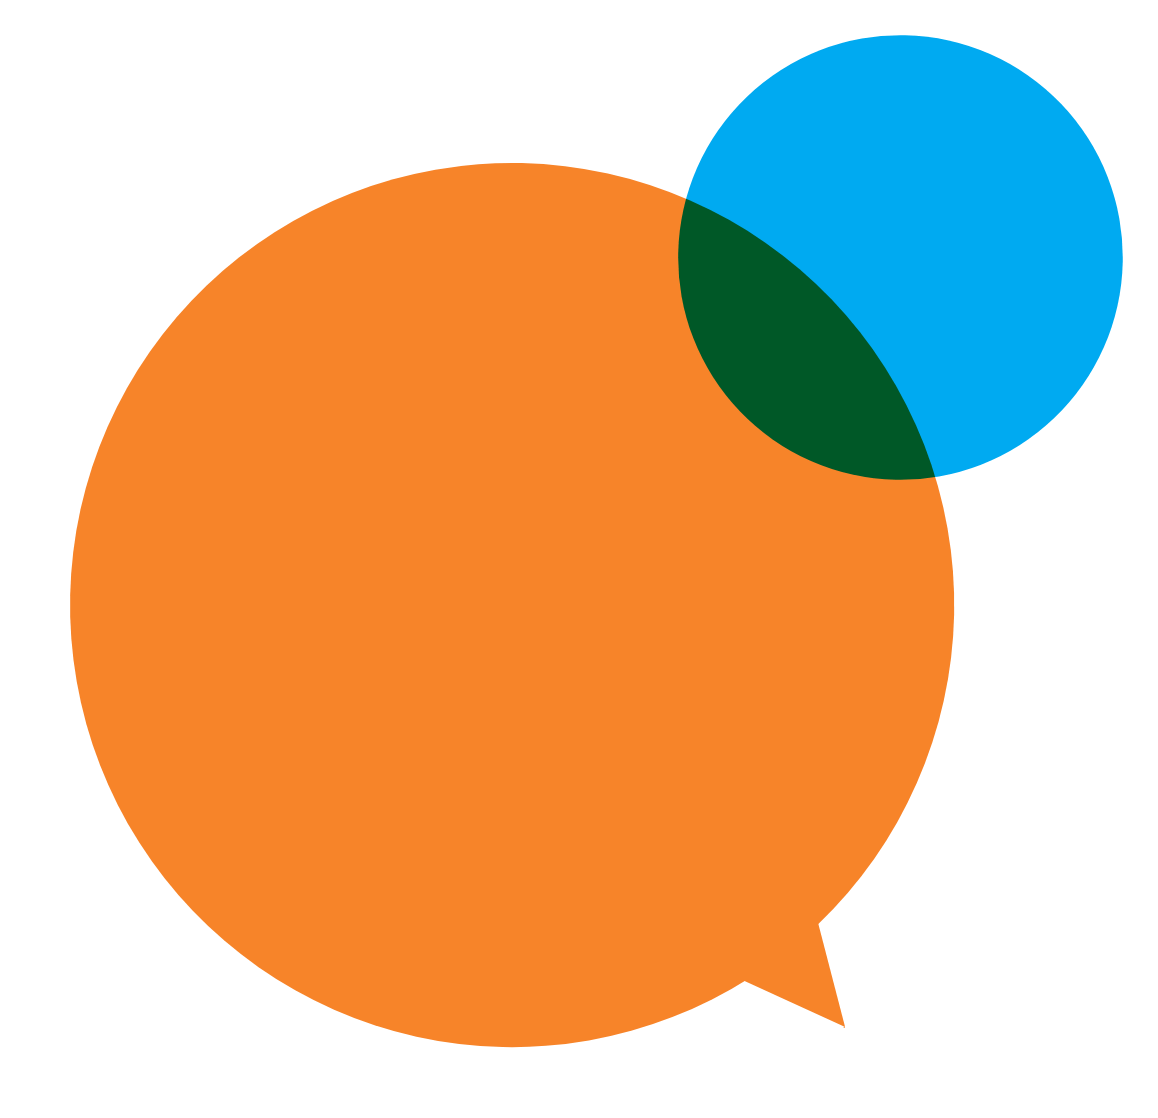 Orange speech bubble with a smaller blue circle overlapping in the top right